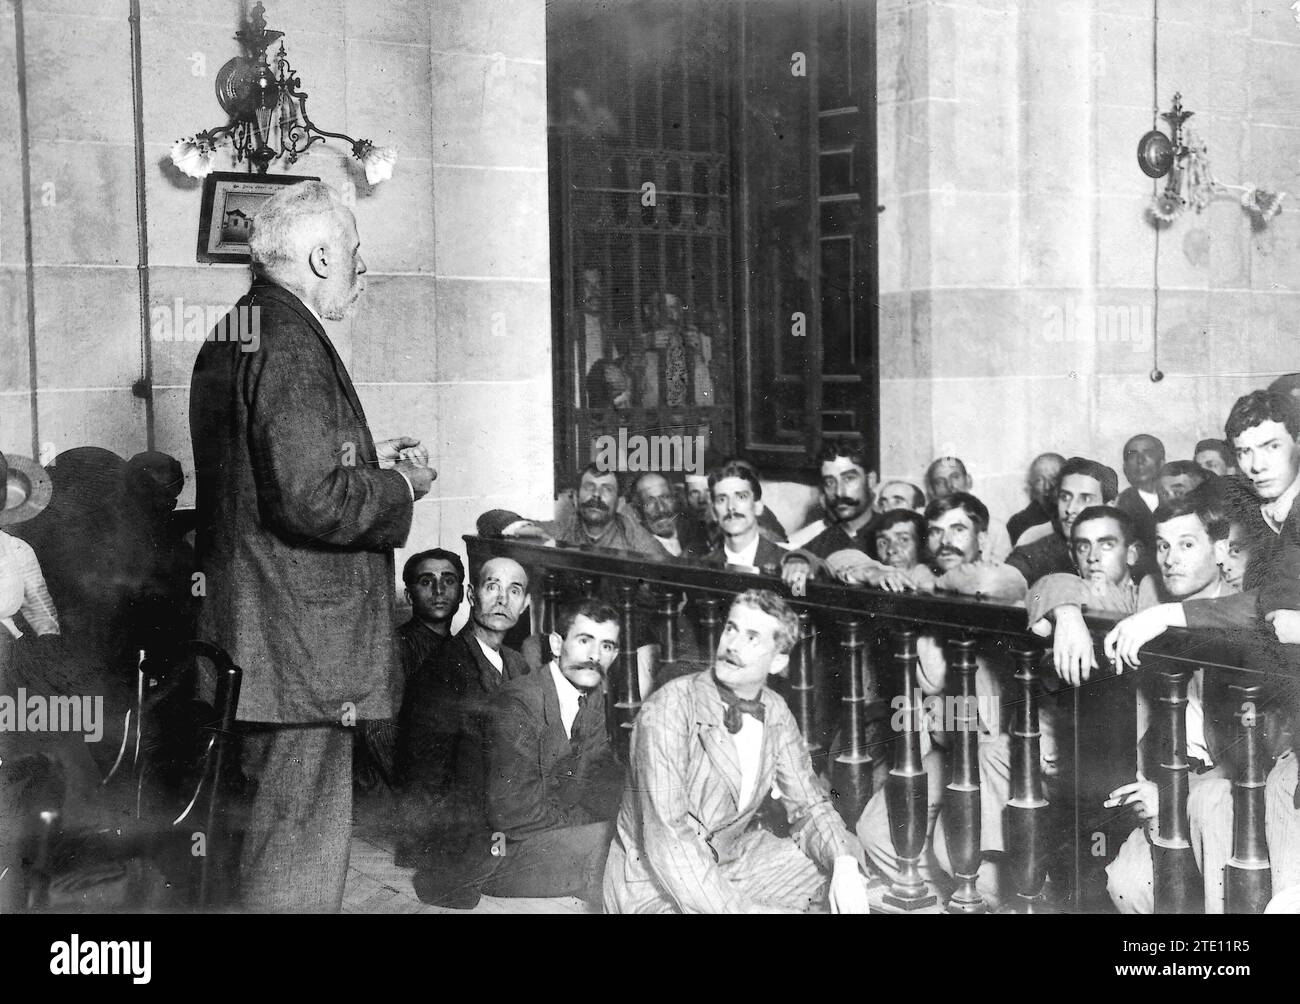 08/31/1913. Socialist Propaganda. Pablo Iglesias giving a speech at the Seville chamber of commerce before the Workers. Credit: Album / Archivo ABC / Juan Barrera Stock Photo